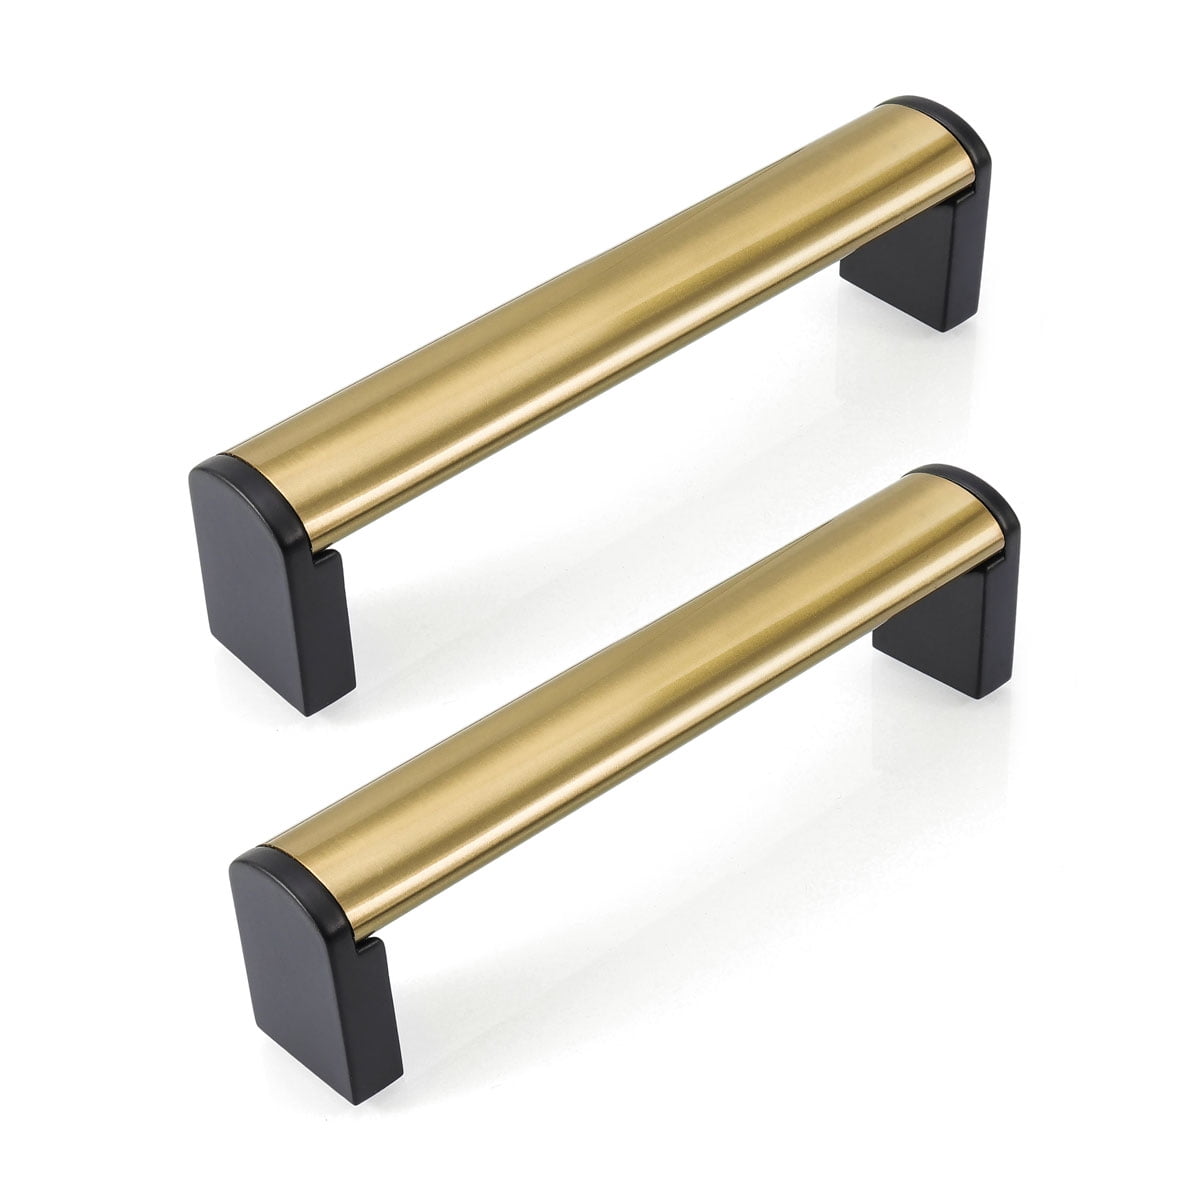 Fulgente 10 Pack Brushed Brass Kitchen Cabinets Handles 3-3/4 inch